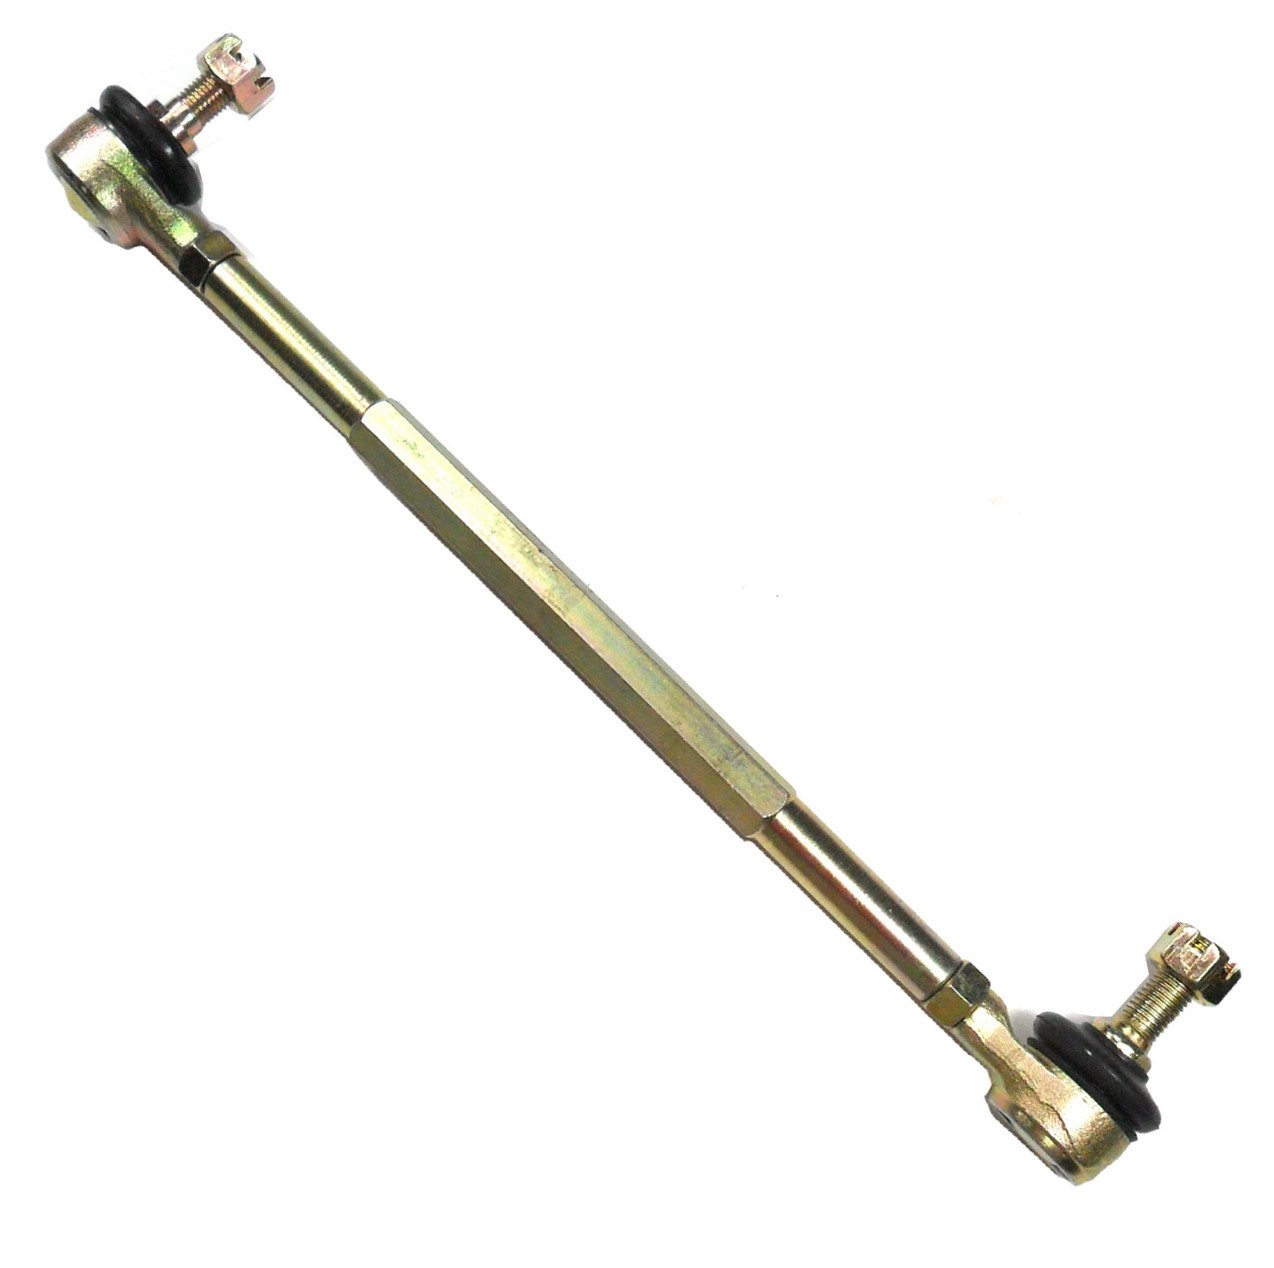 Tie-Rod Assembly Rod Threads=10mm, Ball Joint Threads= 10mm Ball Joints Ctr-to-Ctr (min/max)= 10.5 in / 11.75 in